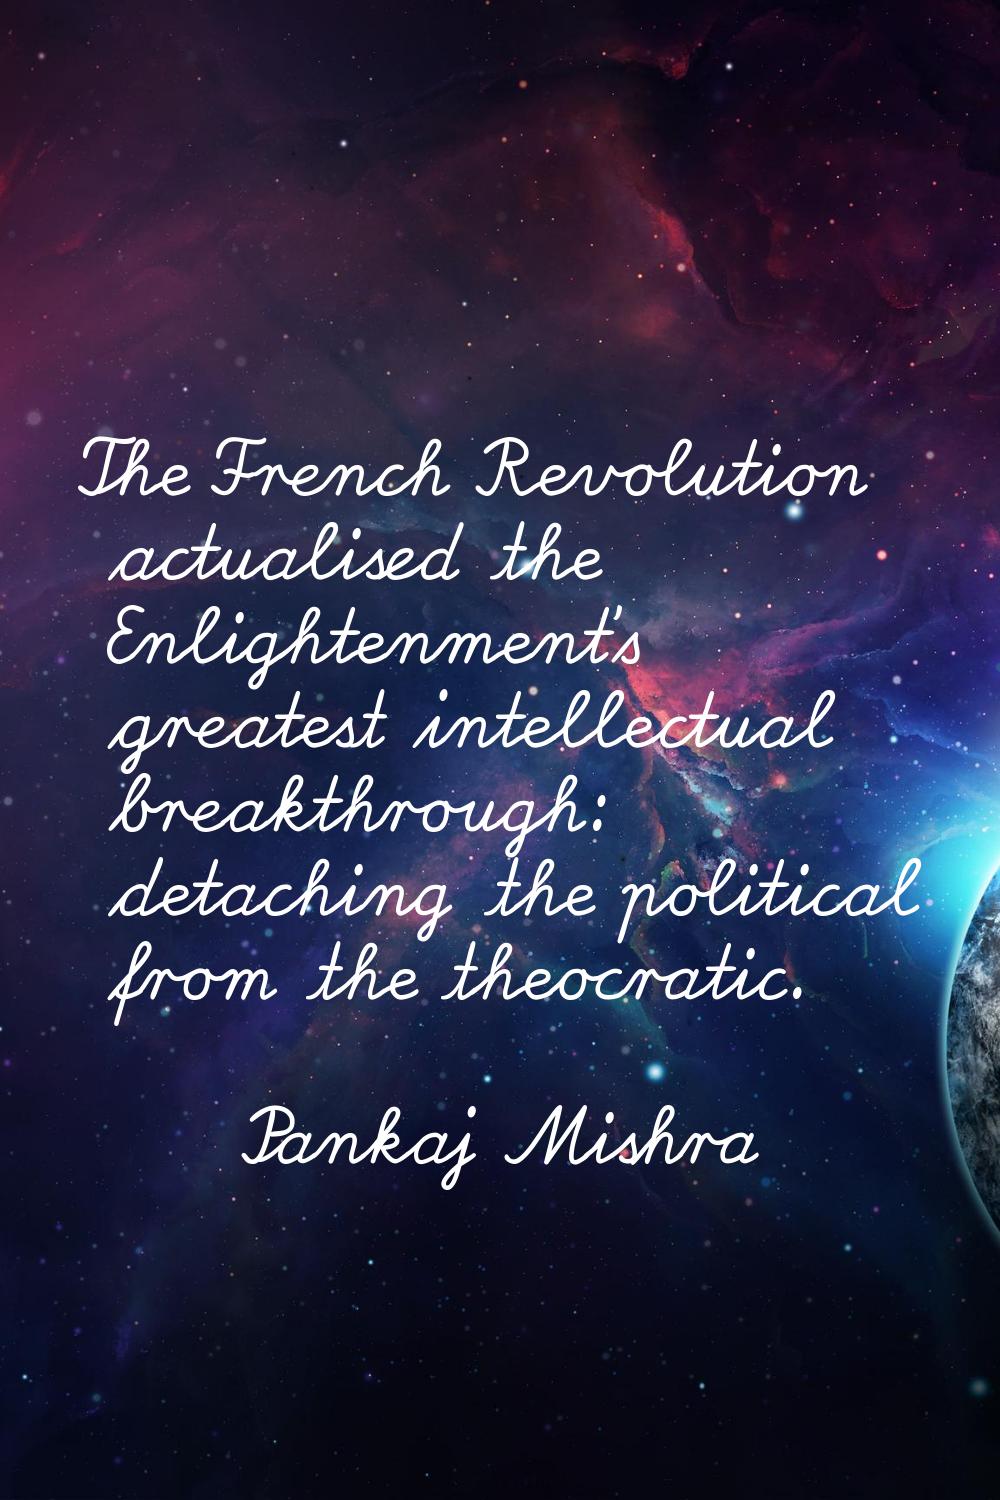 The French Revolution actualised the Enlightenment's greatest intellectual breakthrough: detaching 